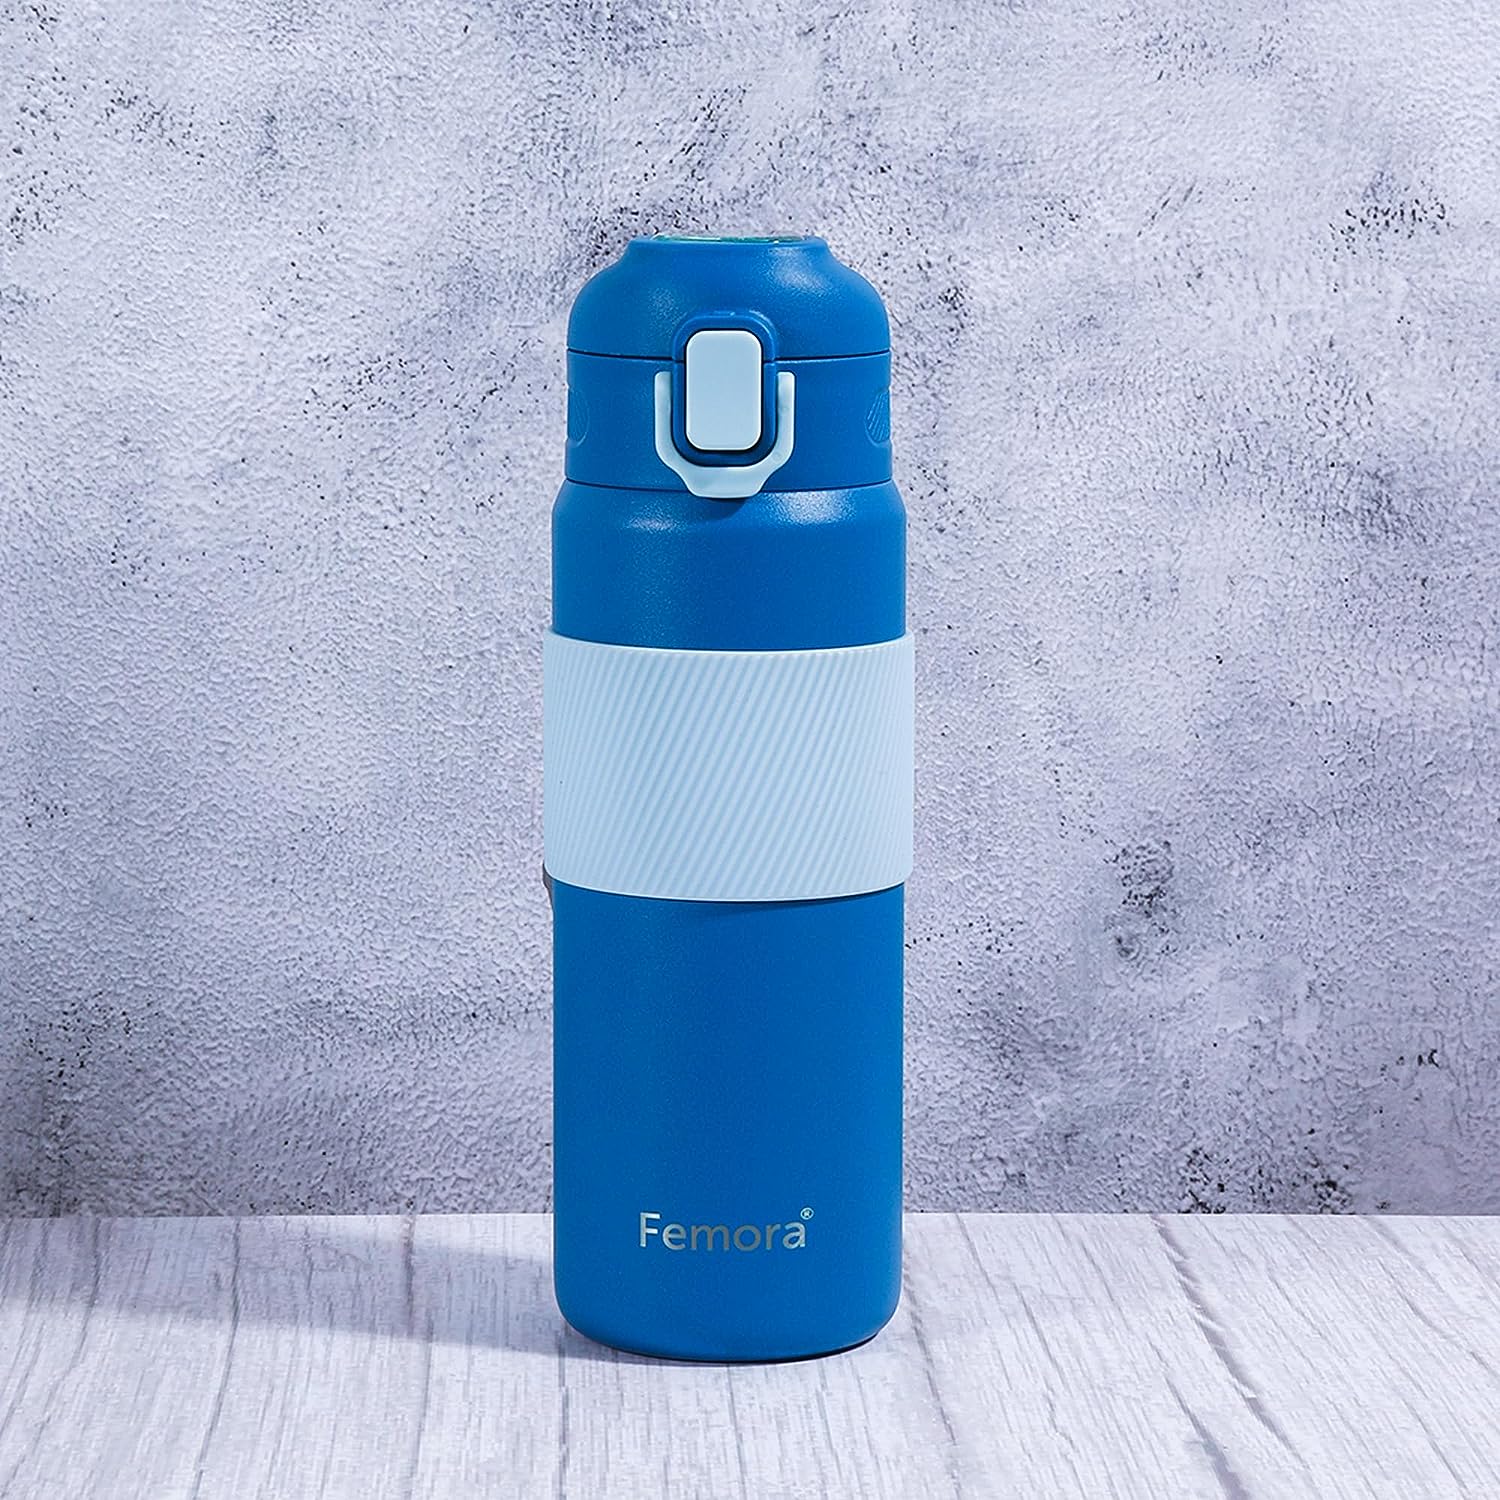 HydroPro Double Walled Stainless Steel Vacuum Insulated Flask Water Bottle, 600 ML, Slate Blue, Femora